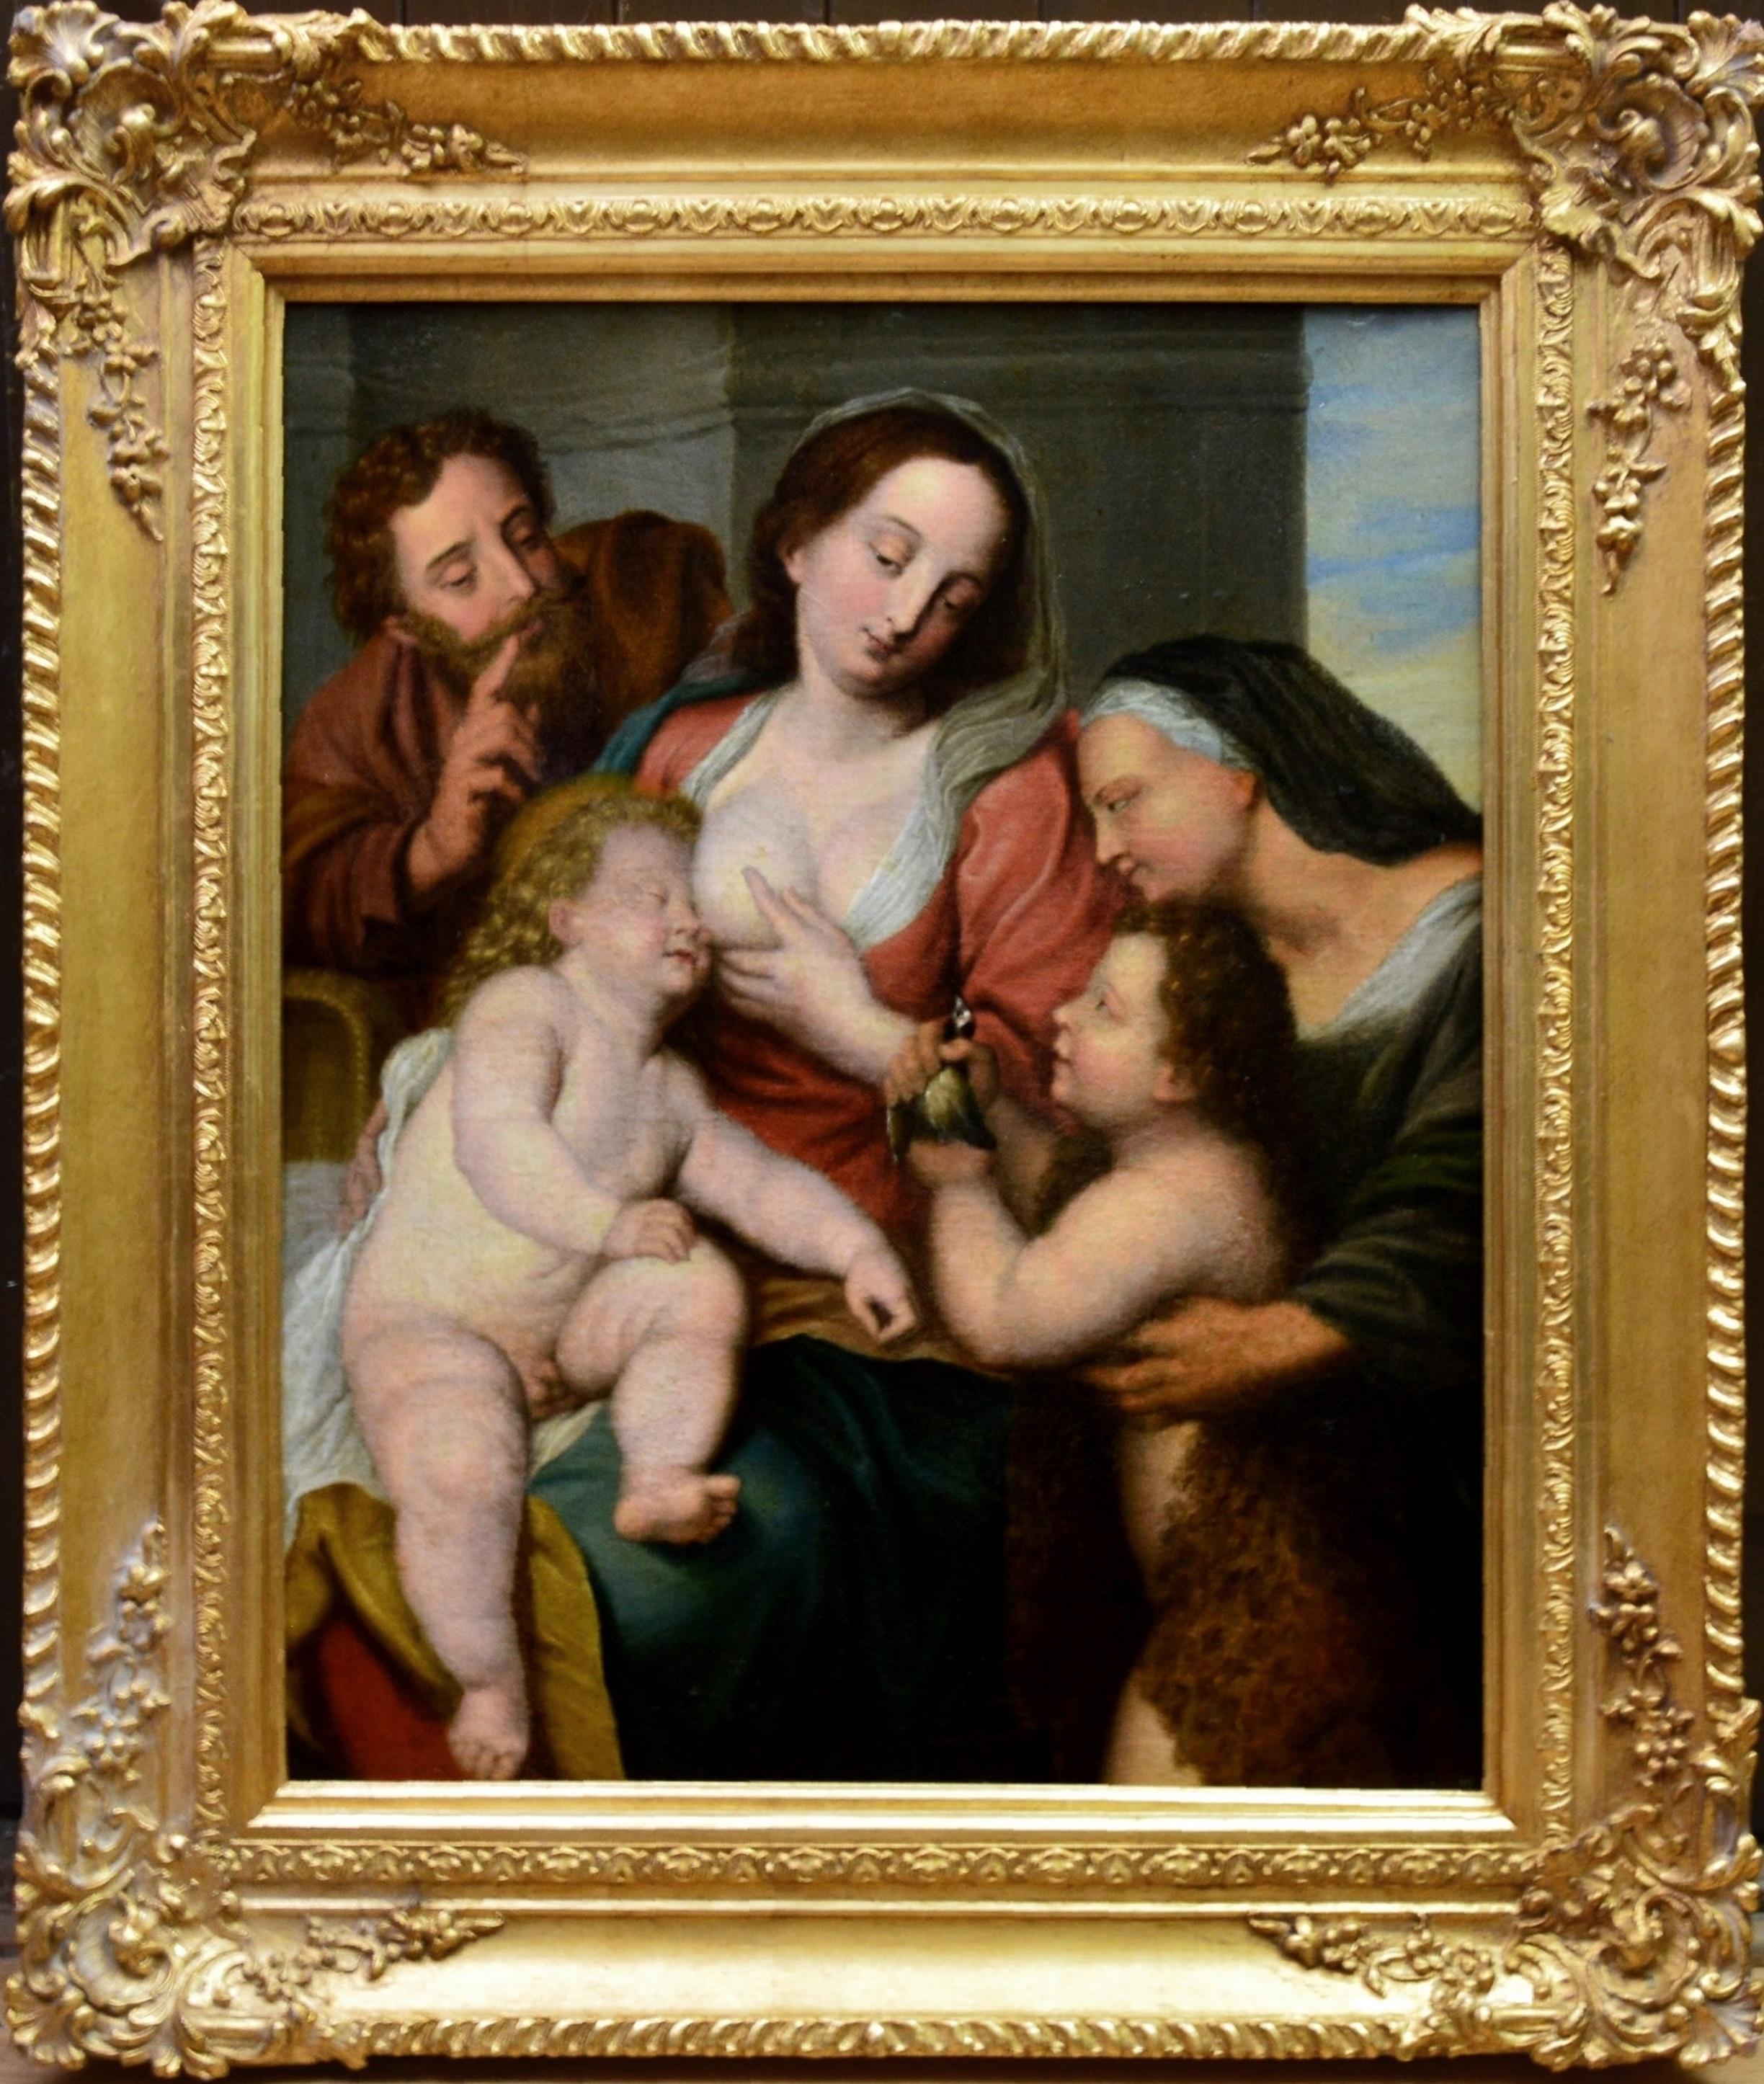 Peter Paul Rubens (studio of) Figurative Painting - The Holy Family - 17th Century Old Master Oil Painting - Peter Paul Rubens